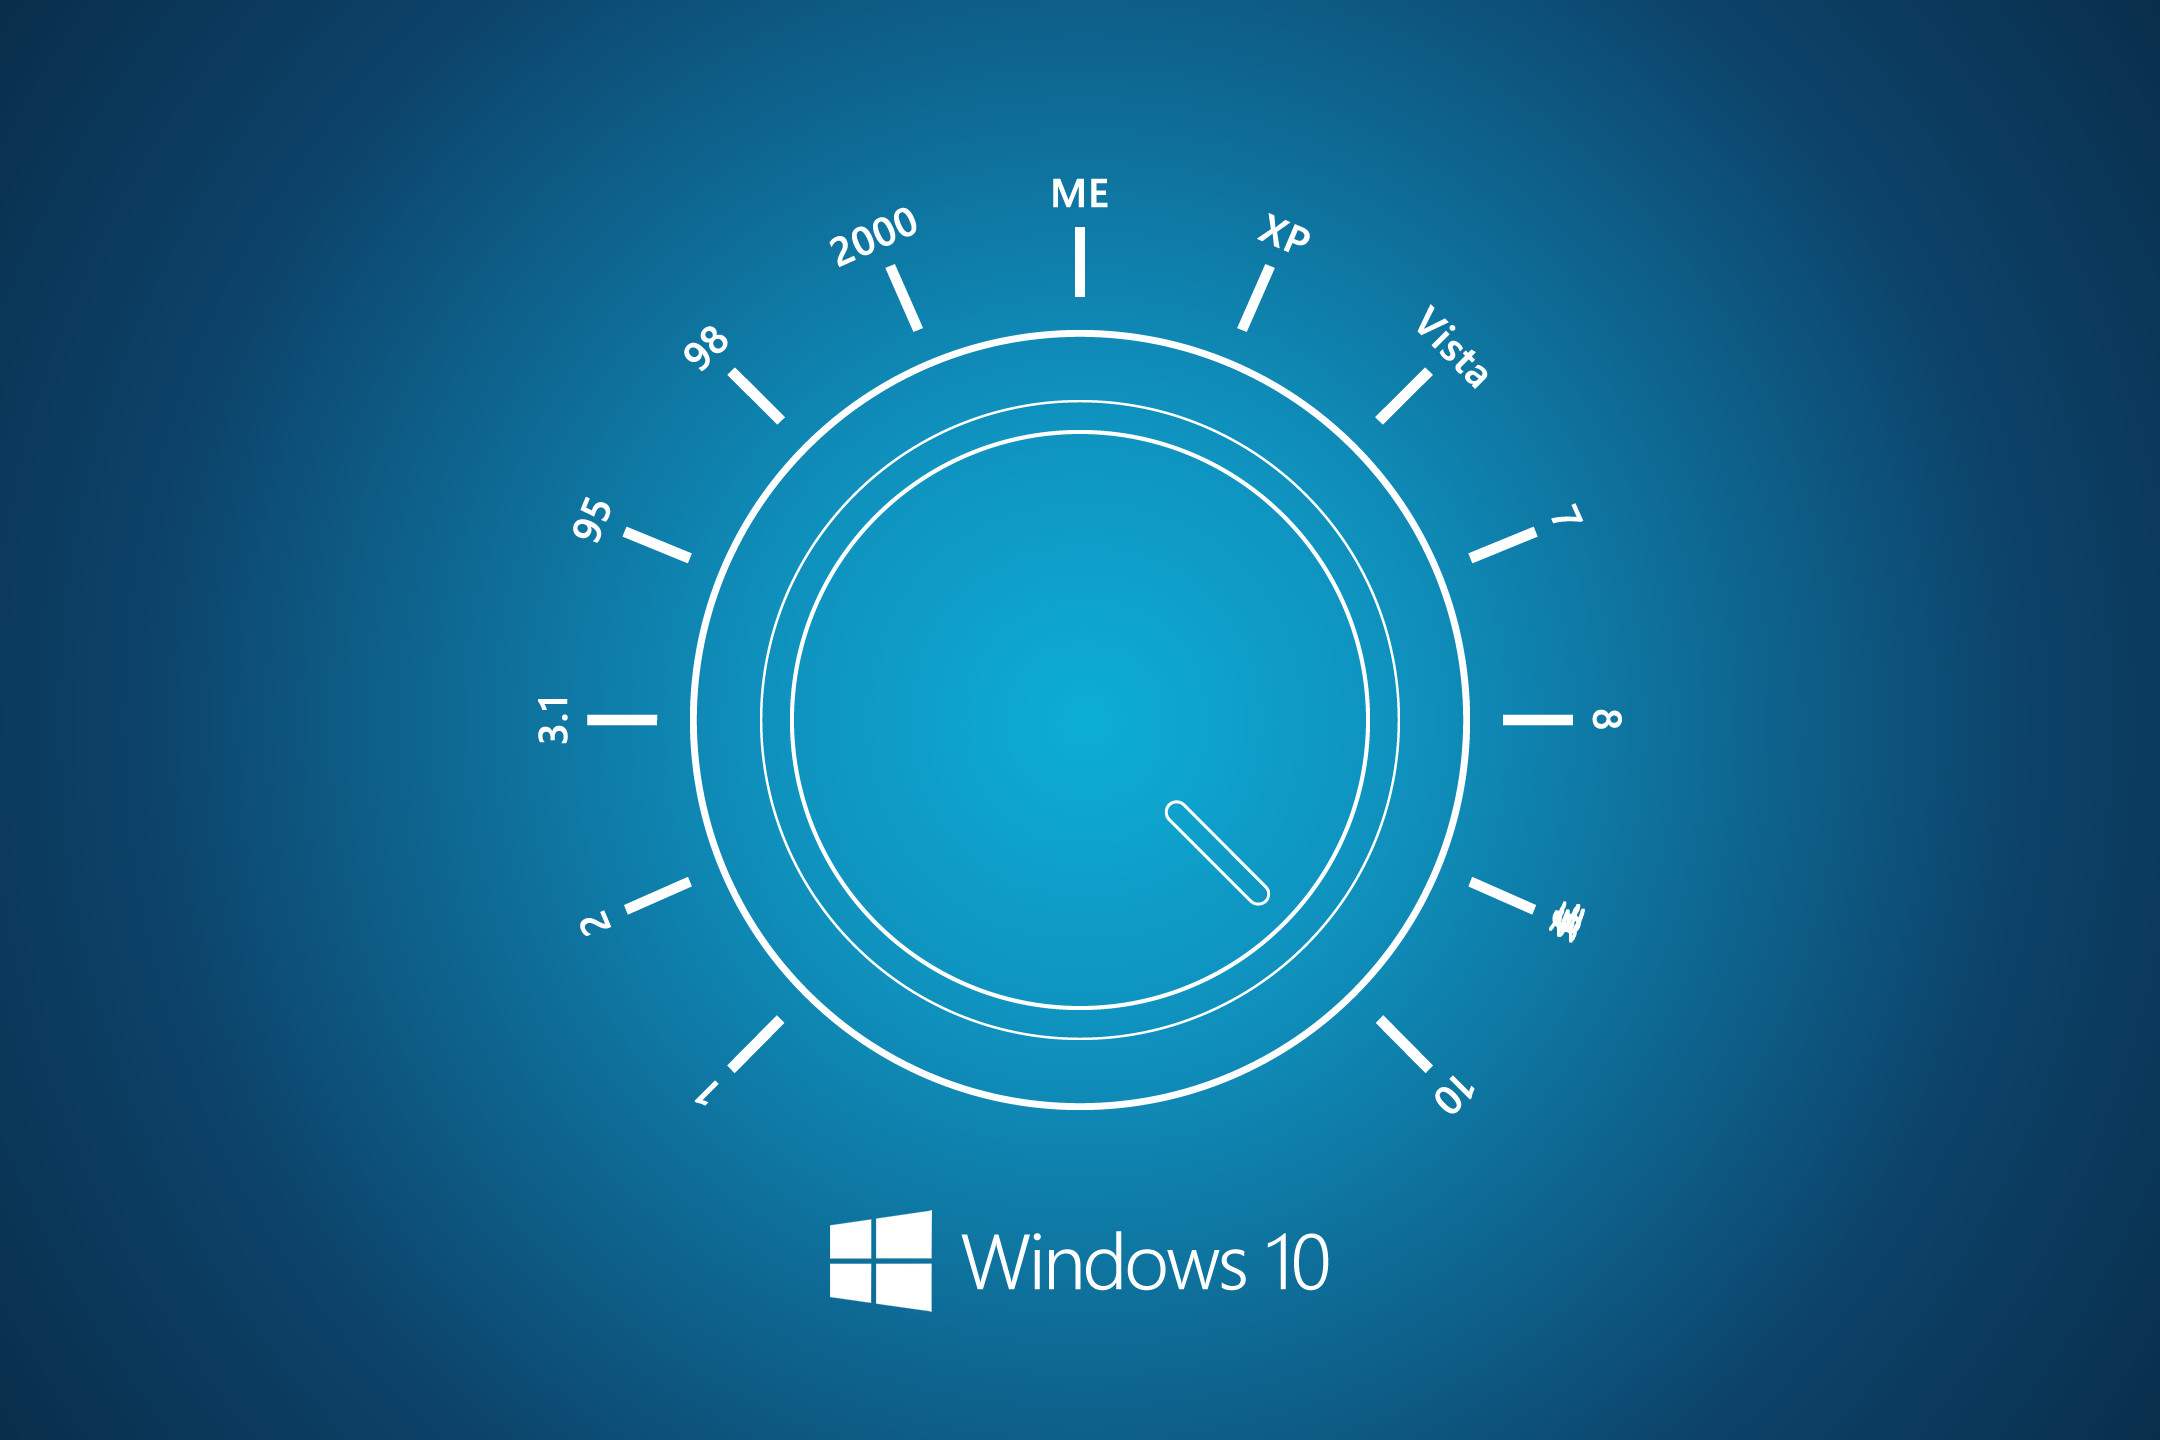 2160x1440 Wallpapers from the Windows 10 Technical Preview: Image5. Speeddial